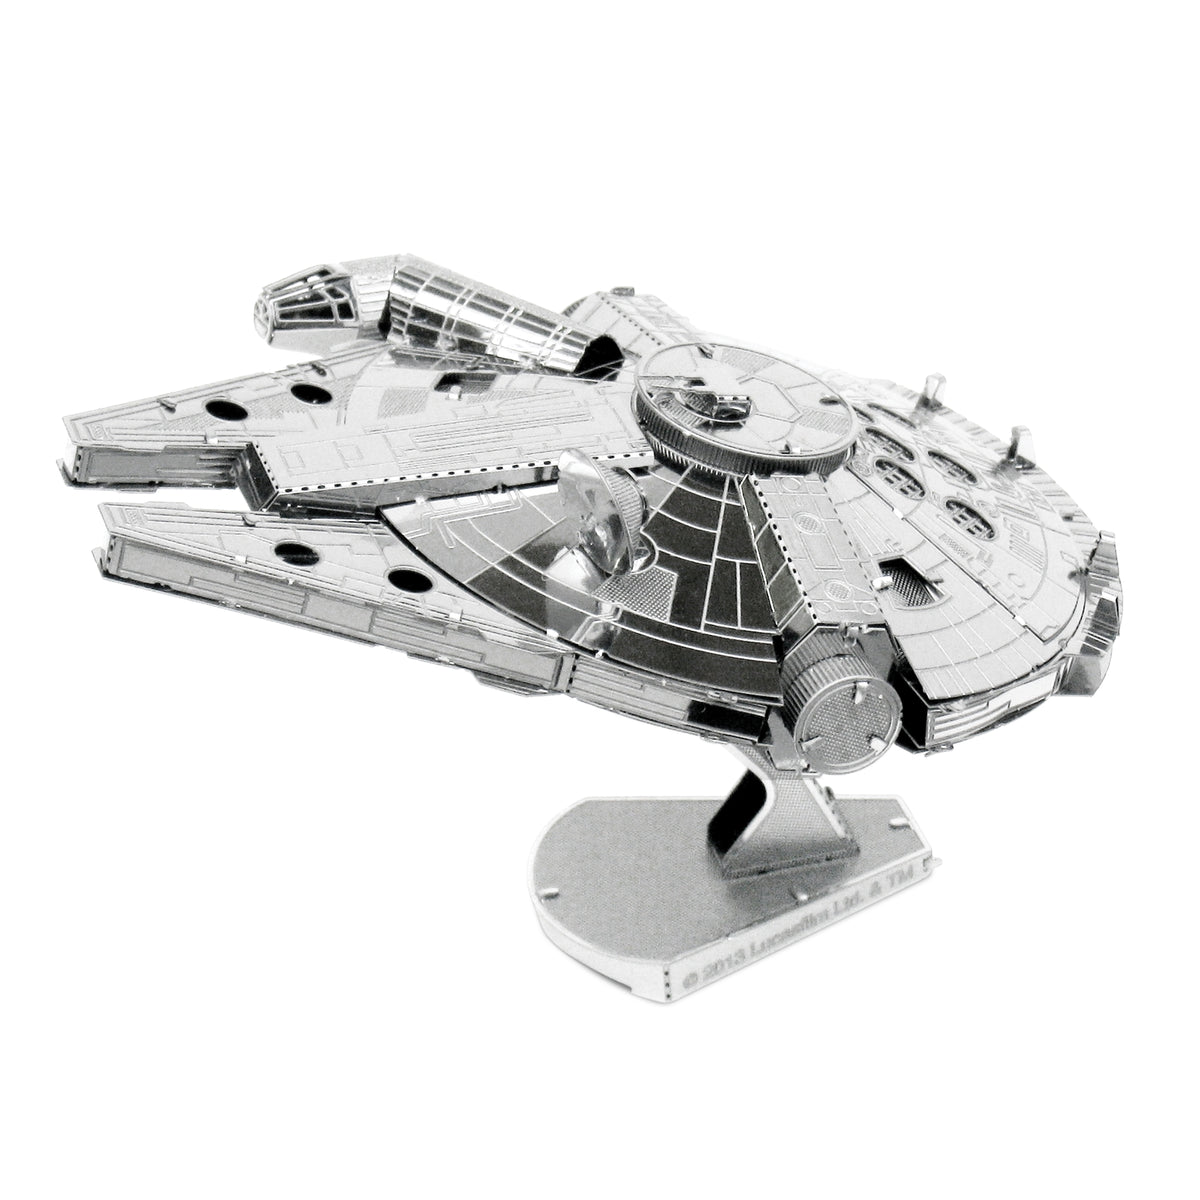 Buy Star Wars Millennium Falcon 3D Model Kit Puzzle, Jigsaws and puzzles